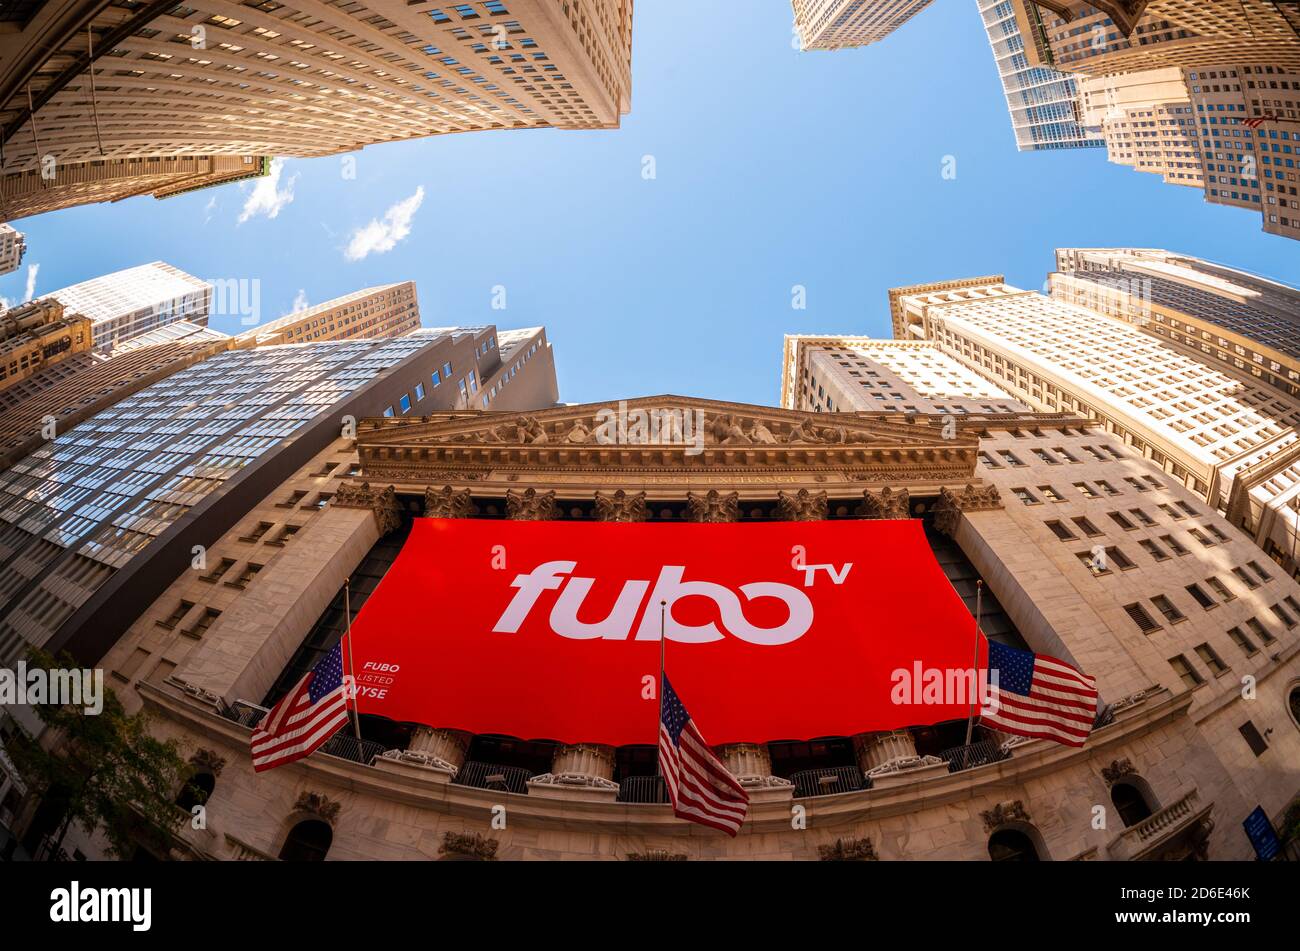 The New York Stock Exchange is decorated on Thursday, October 8, 2020 for the initial public offering of FuboTV. FuboTV is a live streaming service primarily involved in sports entertainment.  (© Richard B. Levine) Stock Photo